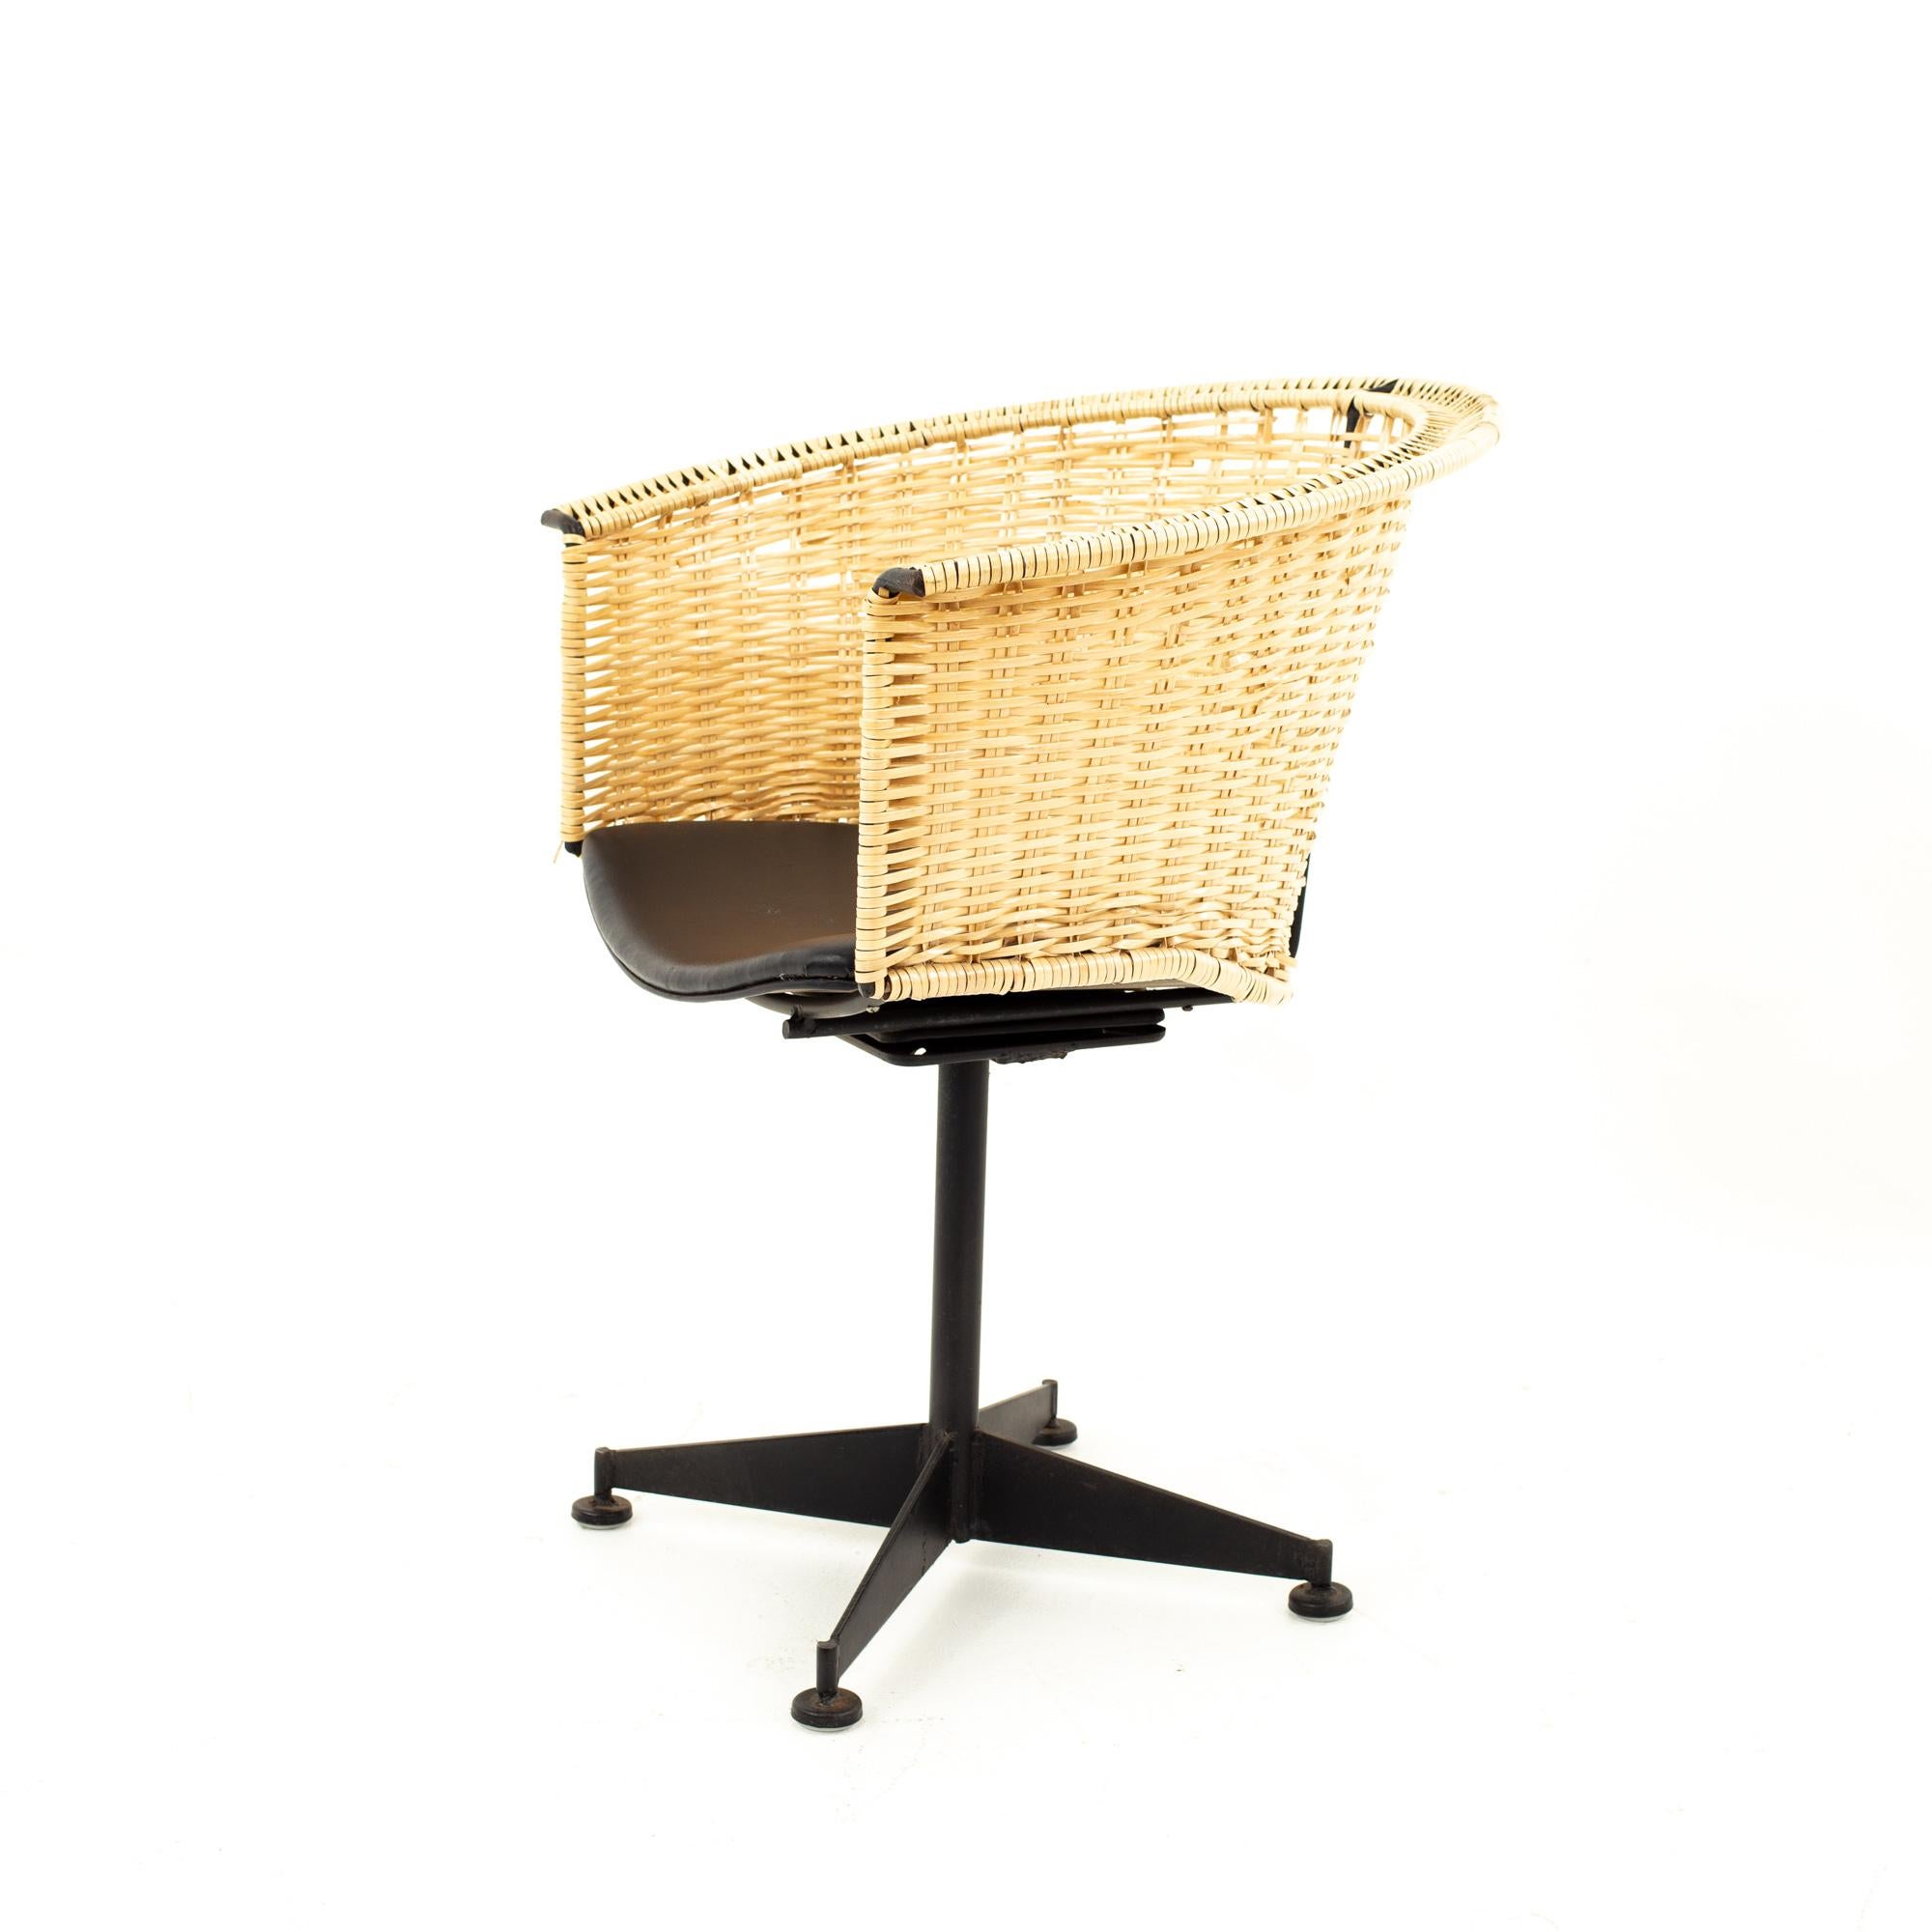 Late 20th Century Arthur Umanoff for Shaver Howard Midcentury Iron and Vinyl Wicker Chairs, Four